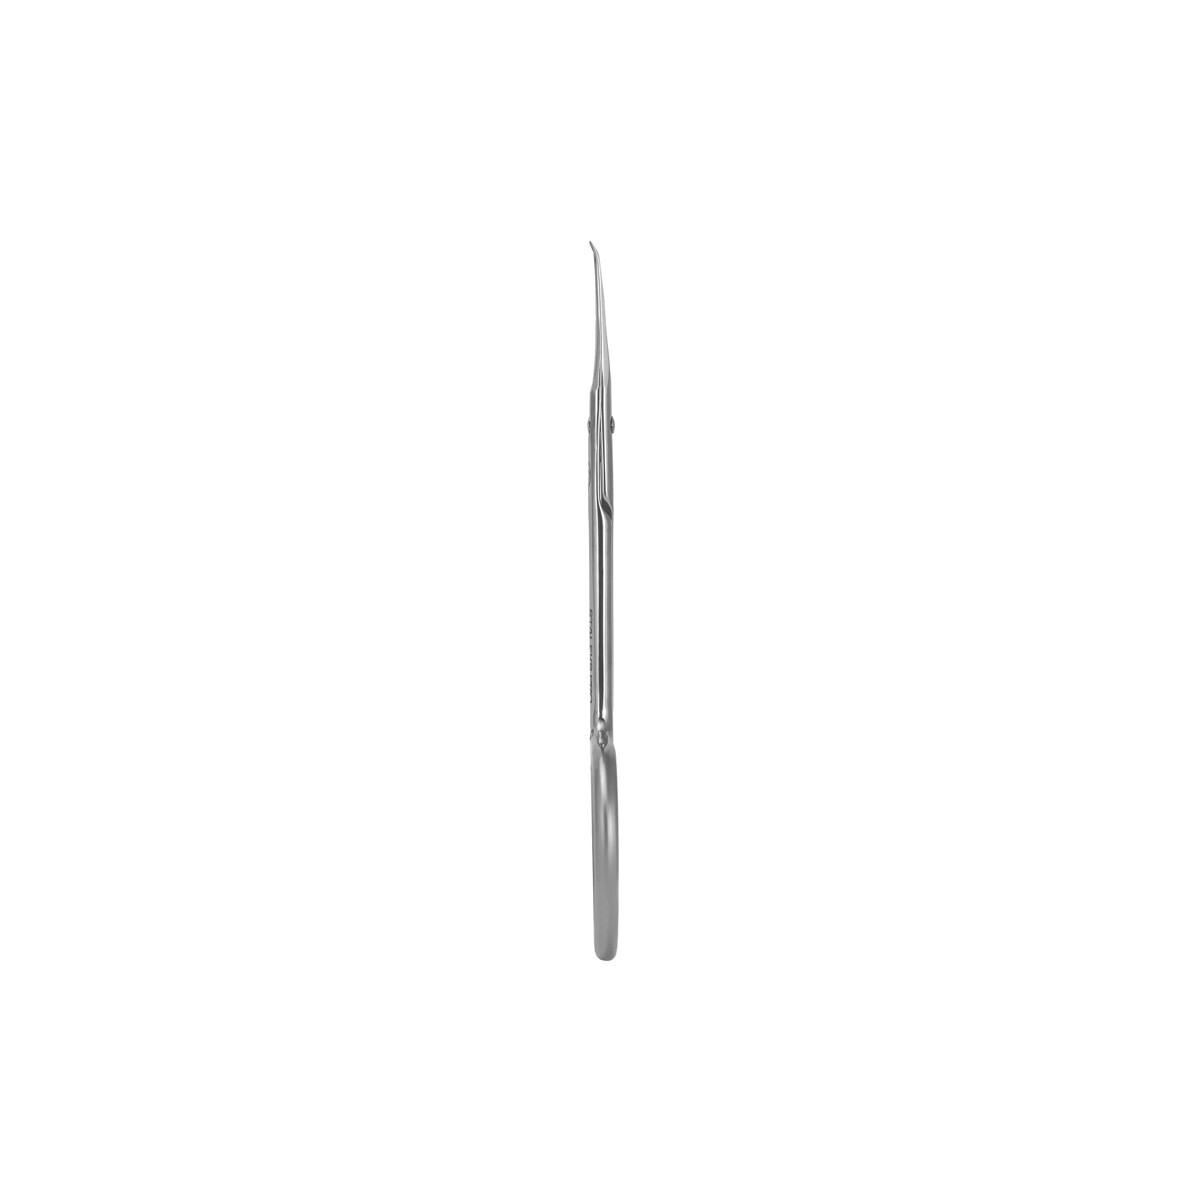 Staleks_Professional_cuticle_scissors_Exc.23_TYPE_2_Magnol_SX-23_2M_5 product view side